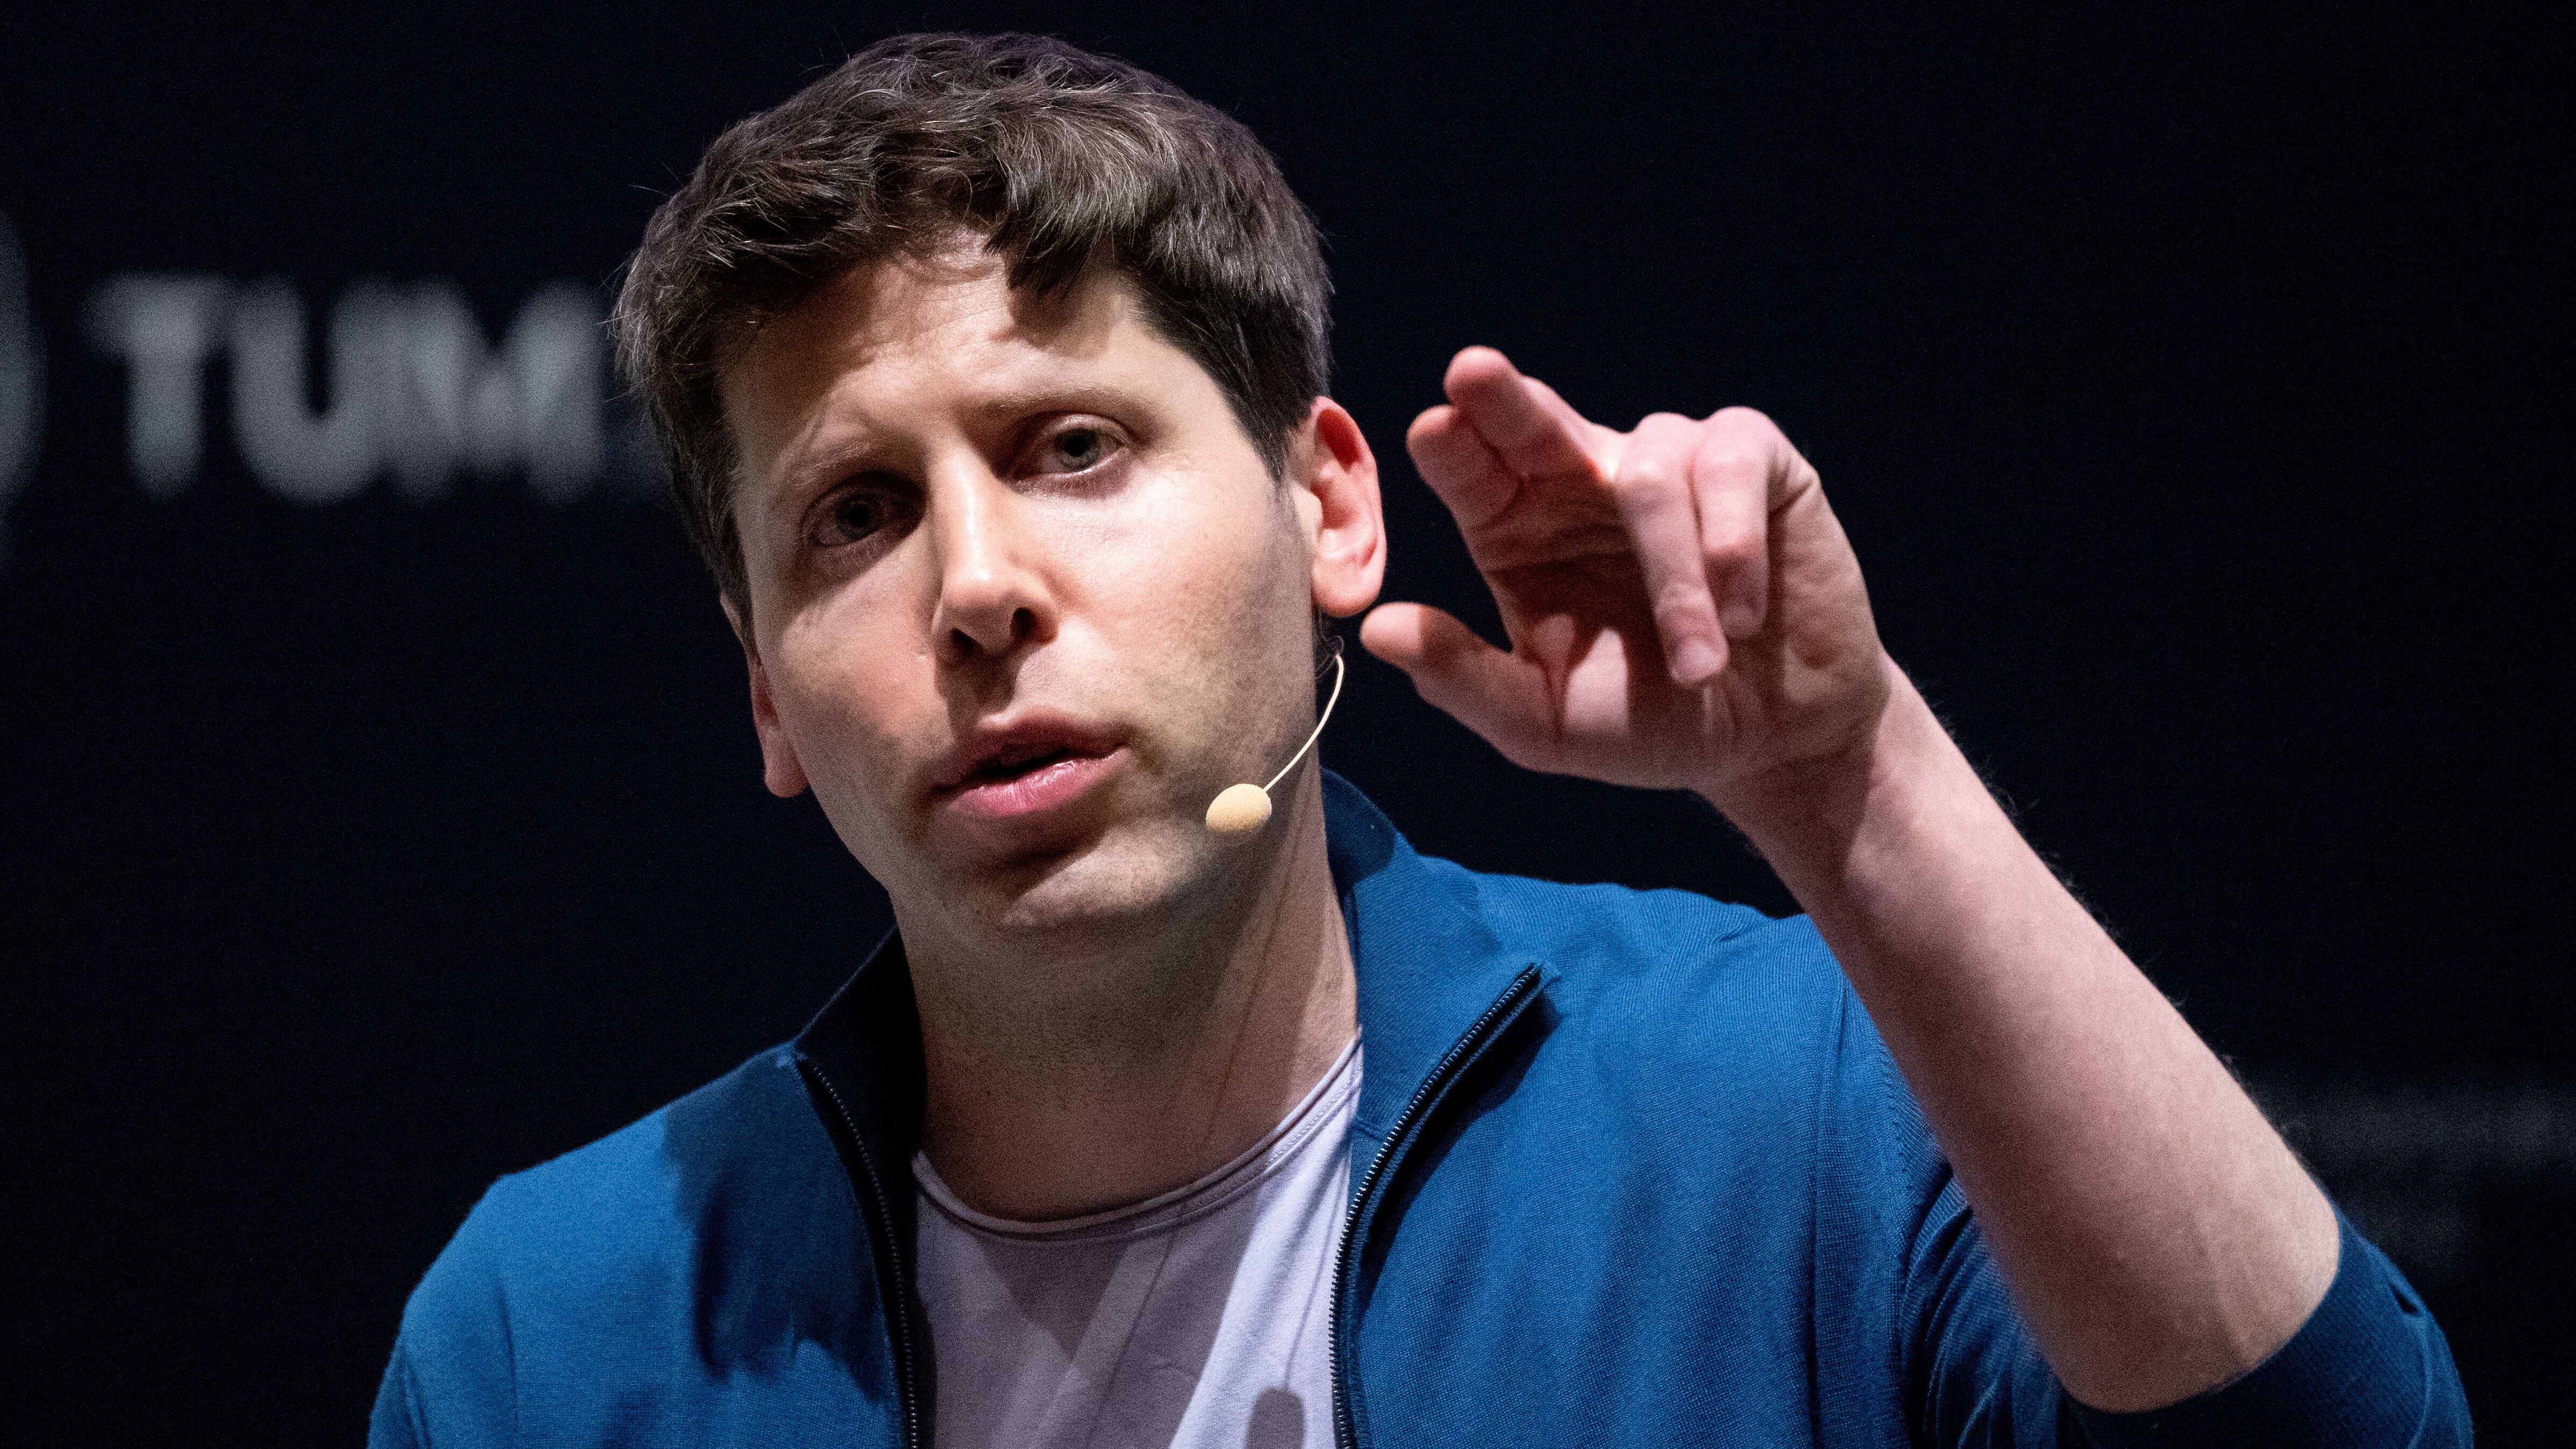 25/05/2023 25 May 2023, Bavaria, Munich: Chief executive officer (CEO) of OpenAI and inventor of the AI software ChatGPT Sam Altman participates in a panel discussion at the Technical University of Munich (TUM). Photo: Sven Hoppe/dpa